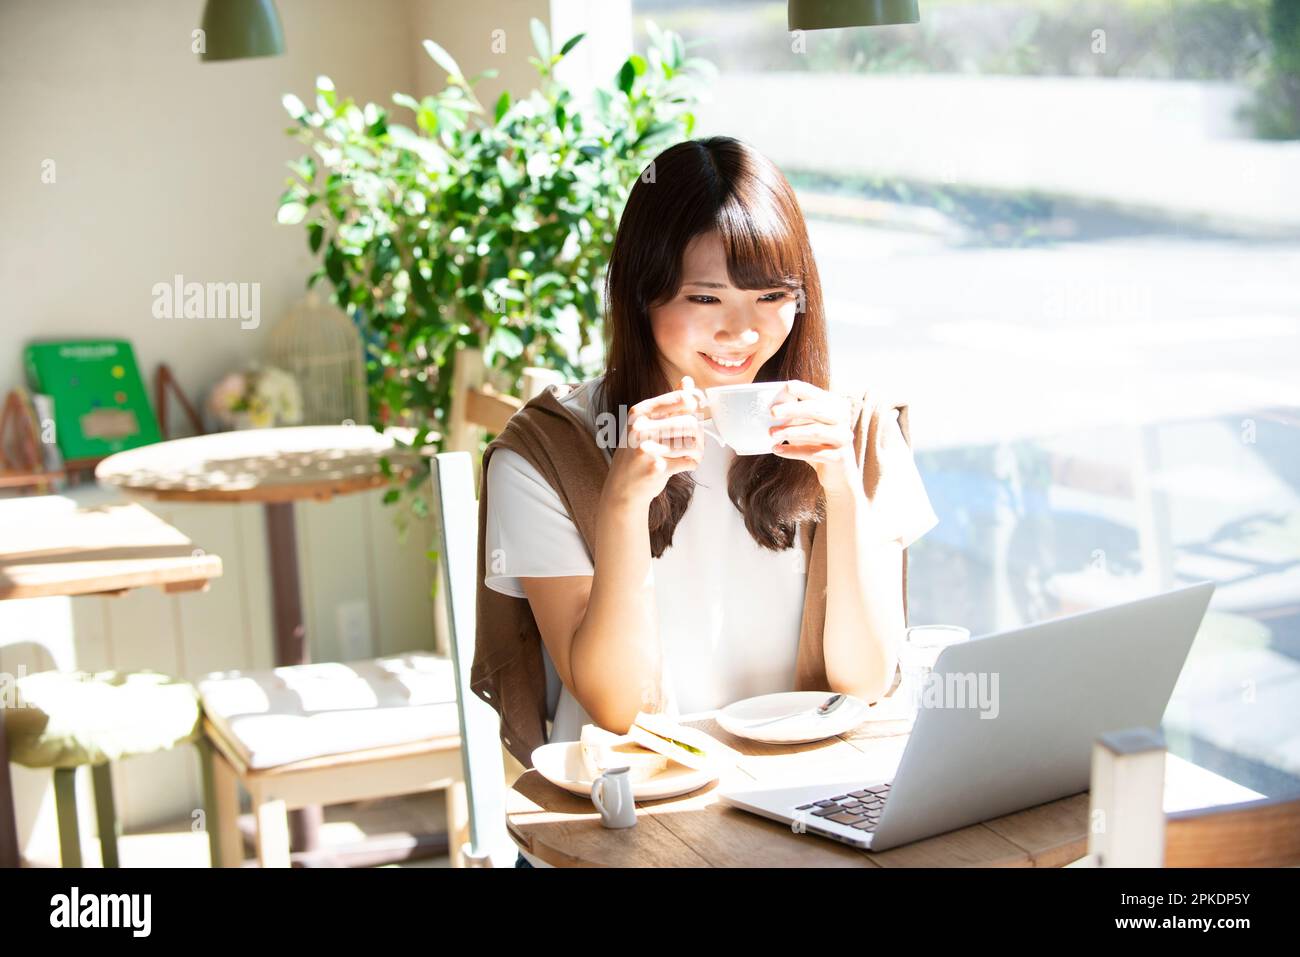 Woman drinking coffee at a cafe Stock Photo